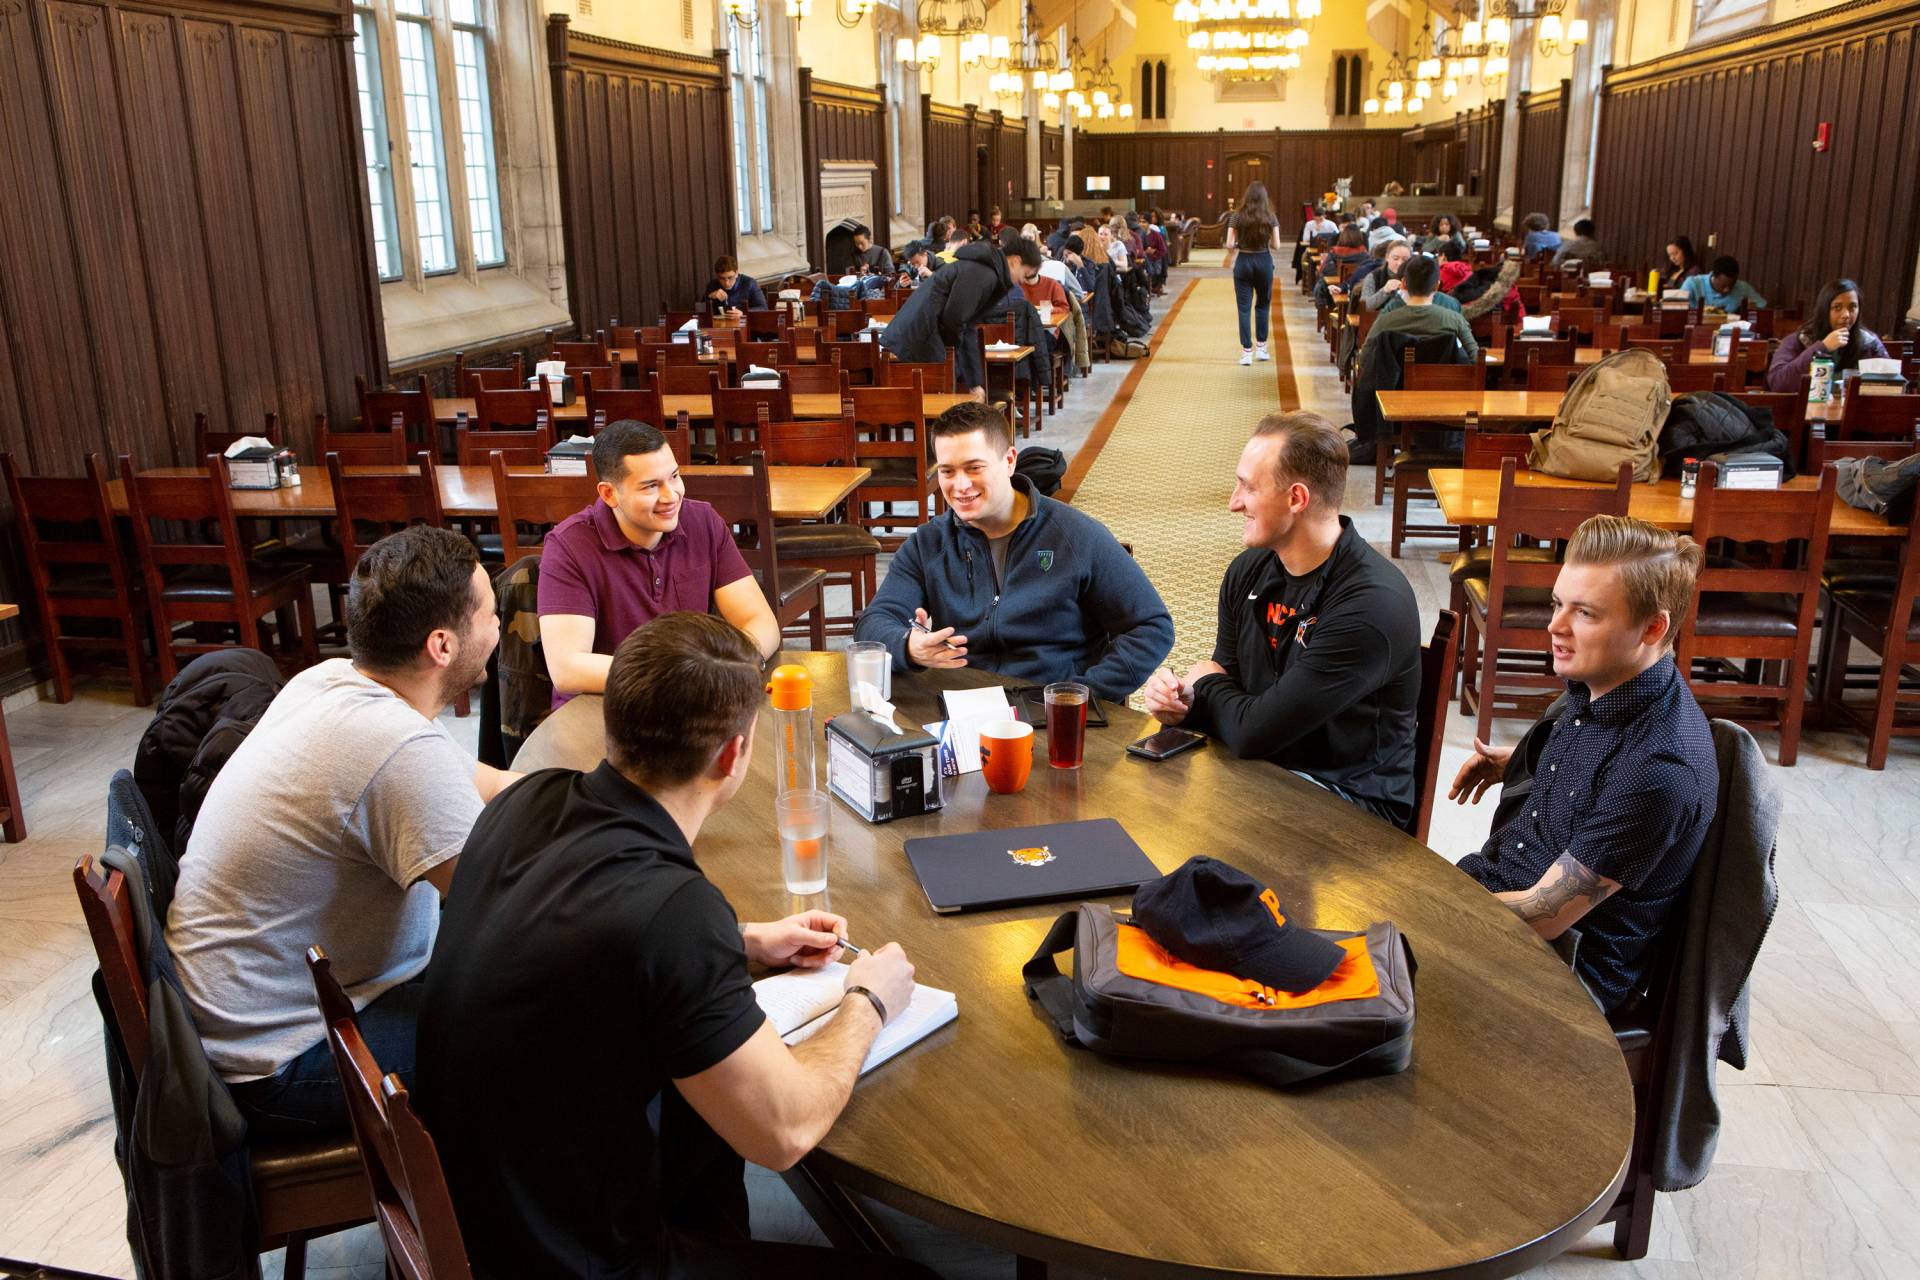 Students share a table in a dining hall